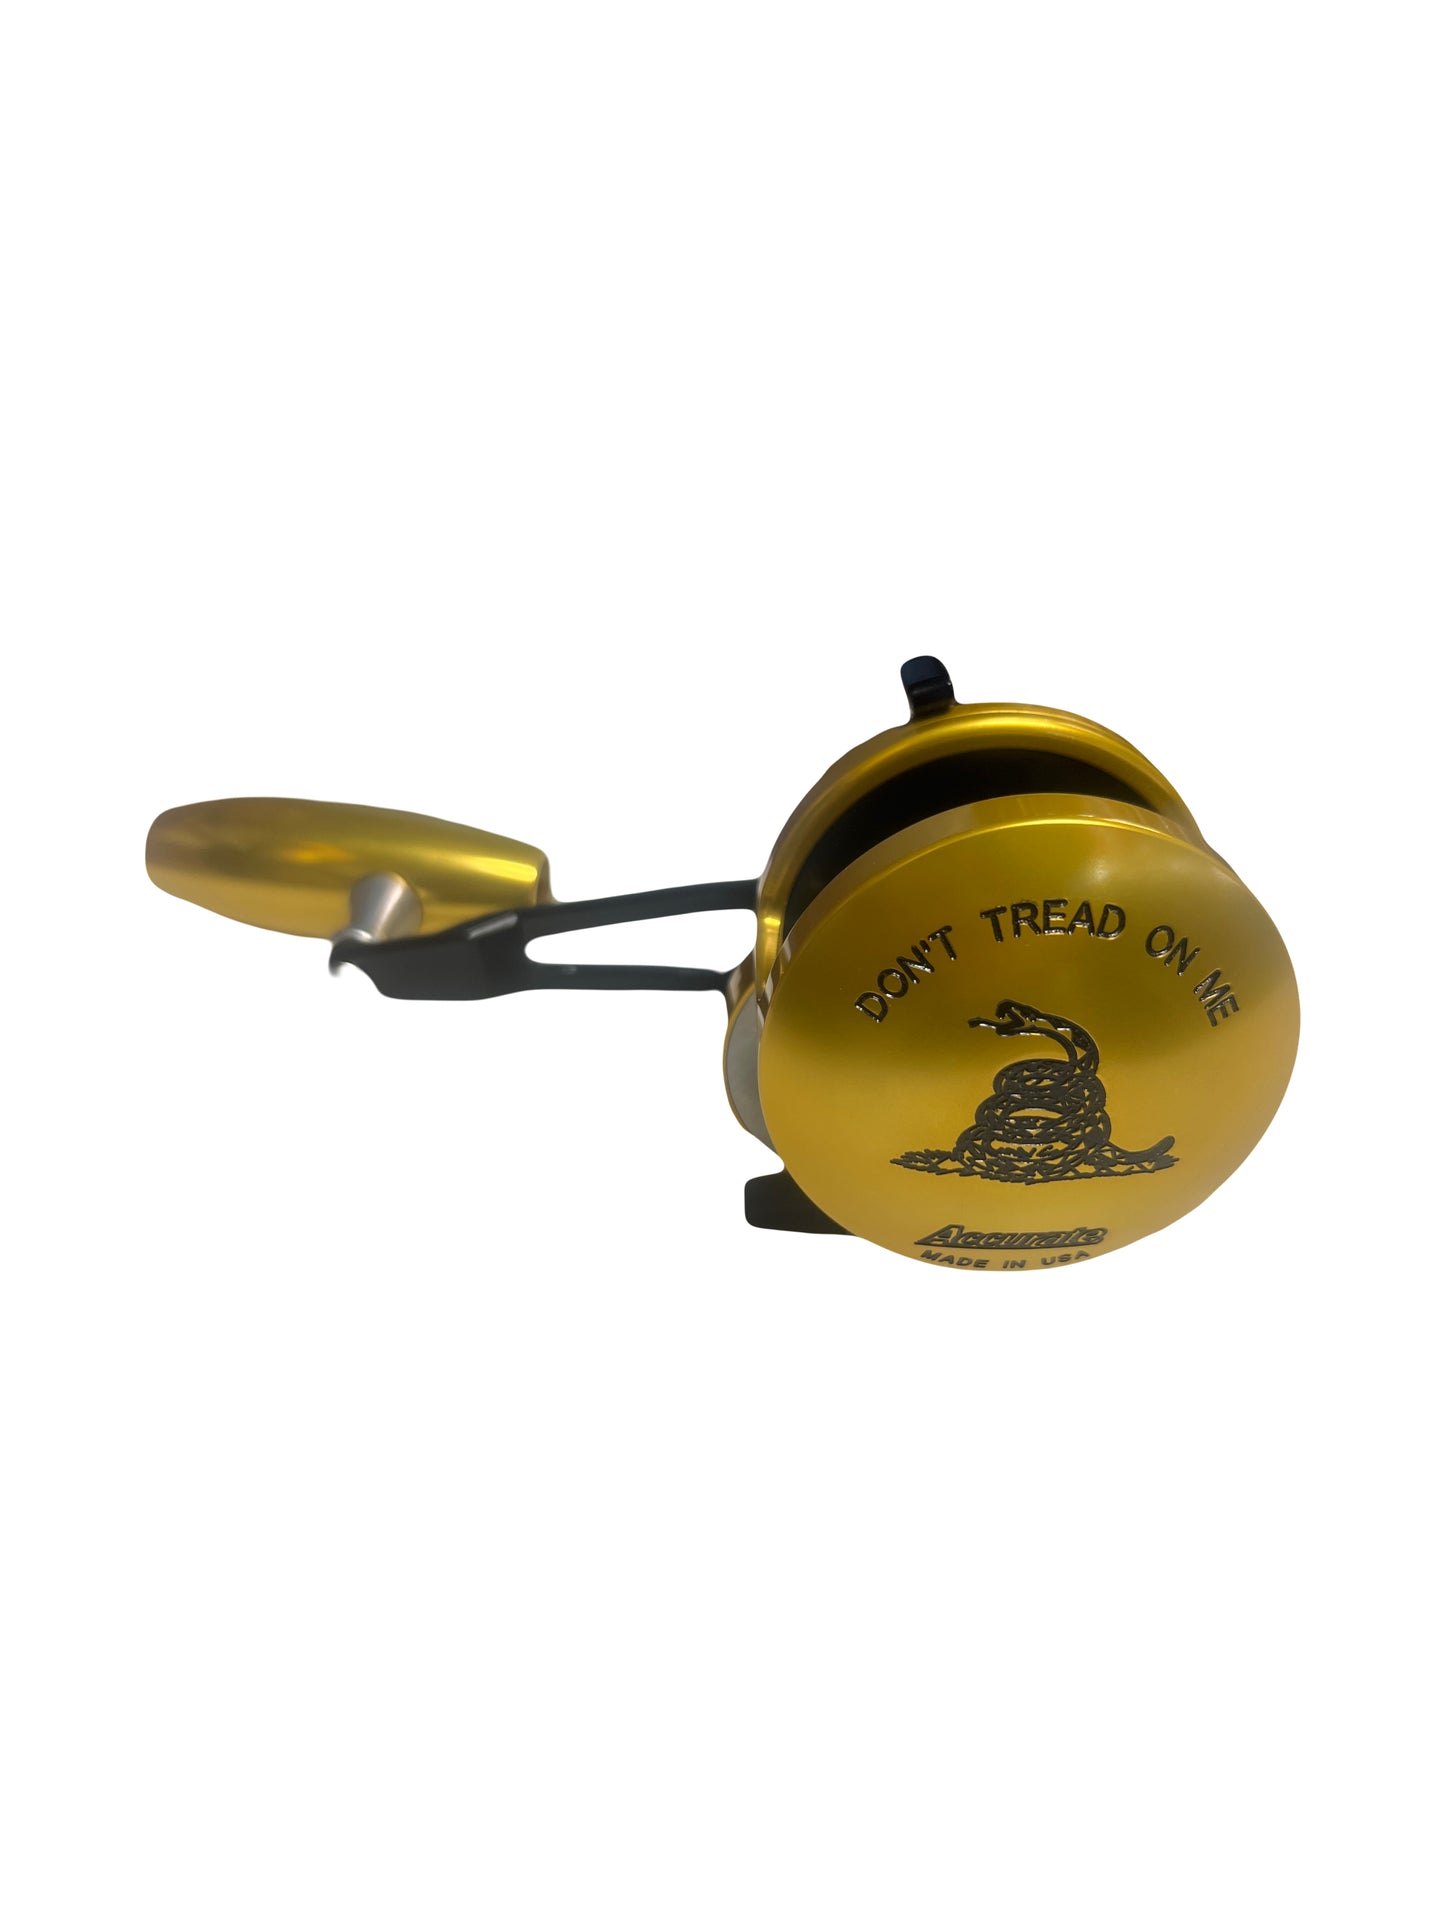 Accurate Valiant 2-Speed Fishing Reel Don't Tread On Me